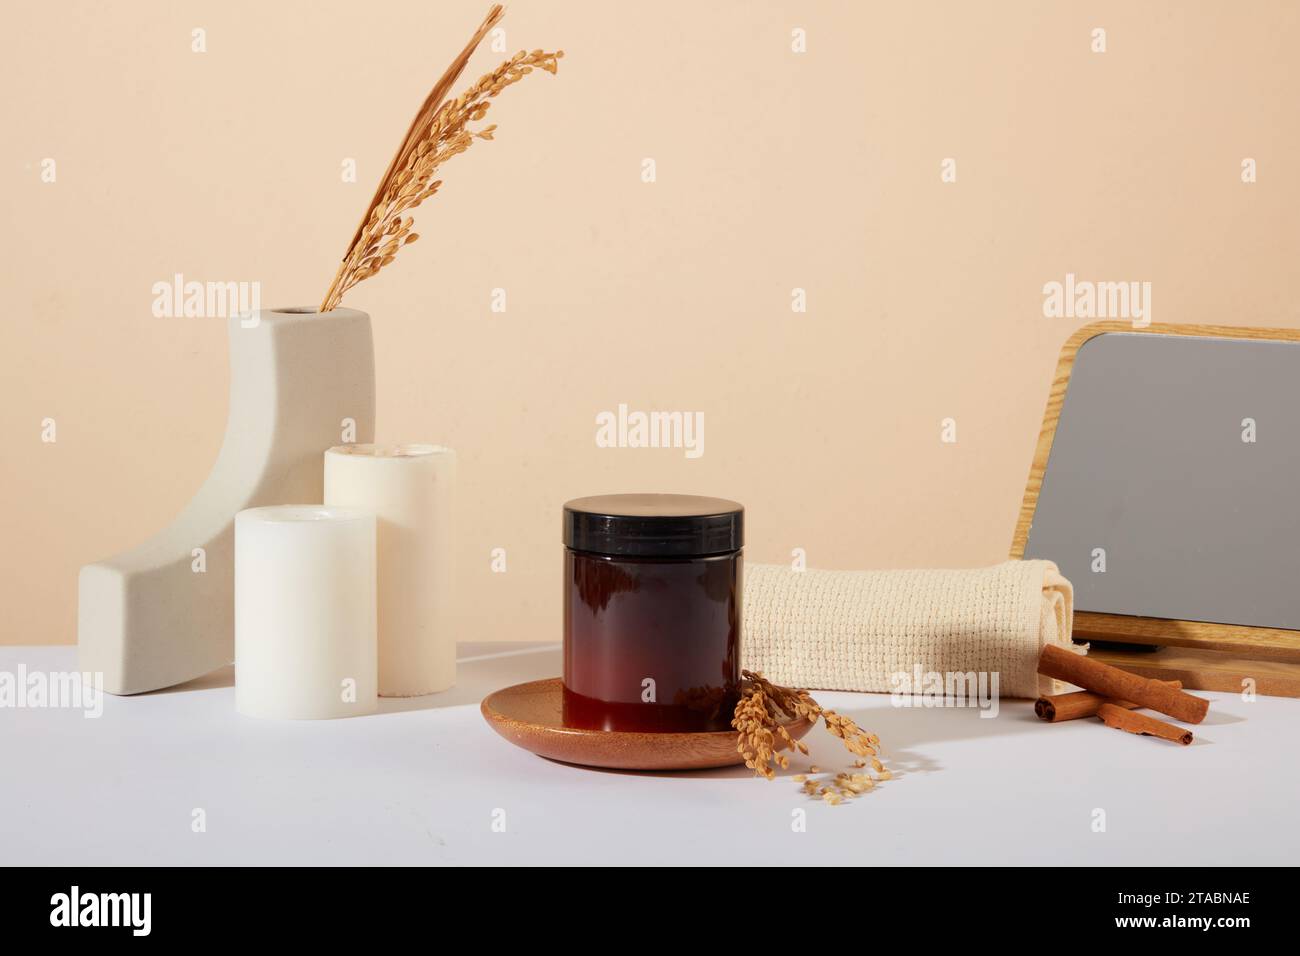 Unlabeled scrub jar on a wooden dish, showcasing a cosmetic derived from rice bran. Rice bran, known for exfoliation, helps remove dead skin cells, pr Stock Photo